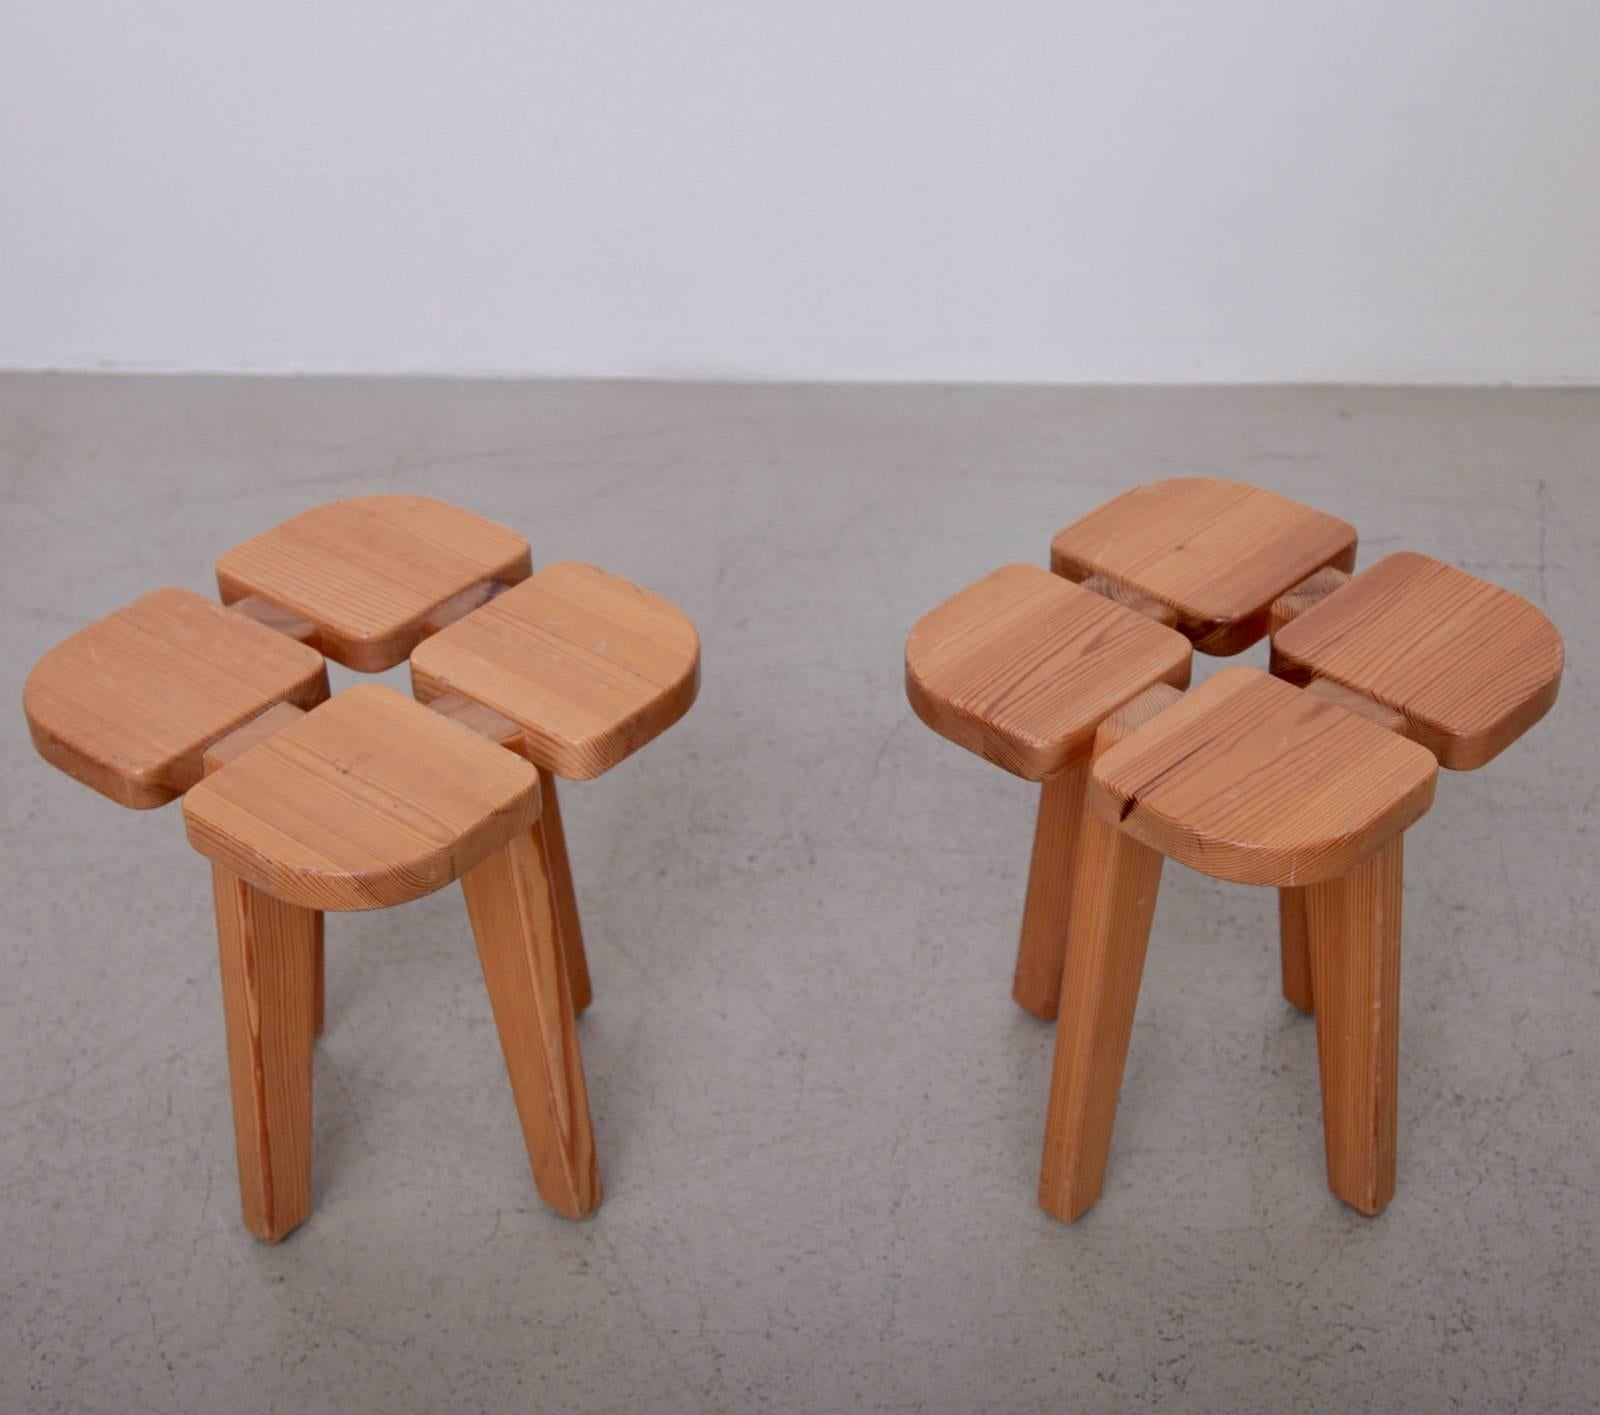 Pair of stools designed by Lisa Johansson-Pape, circa 1950 for Stockmann AB, Kervo Woodwork Factory, Helsinki. In good original condition, with minor wear consistent with age and use, preserving a beautiful patina.
